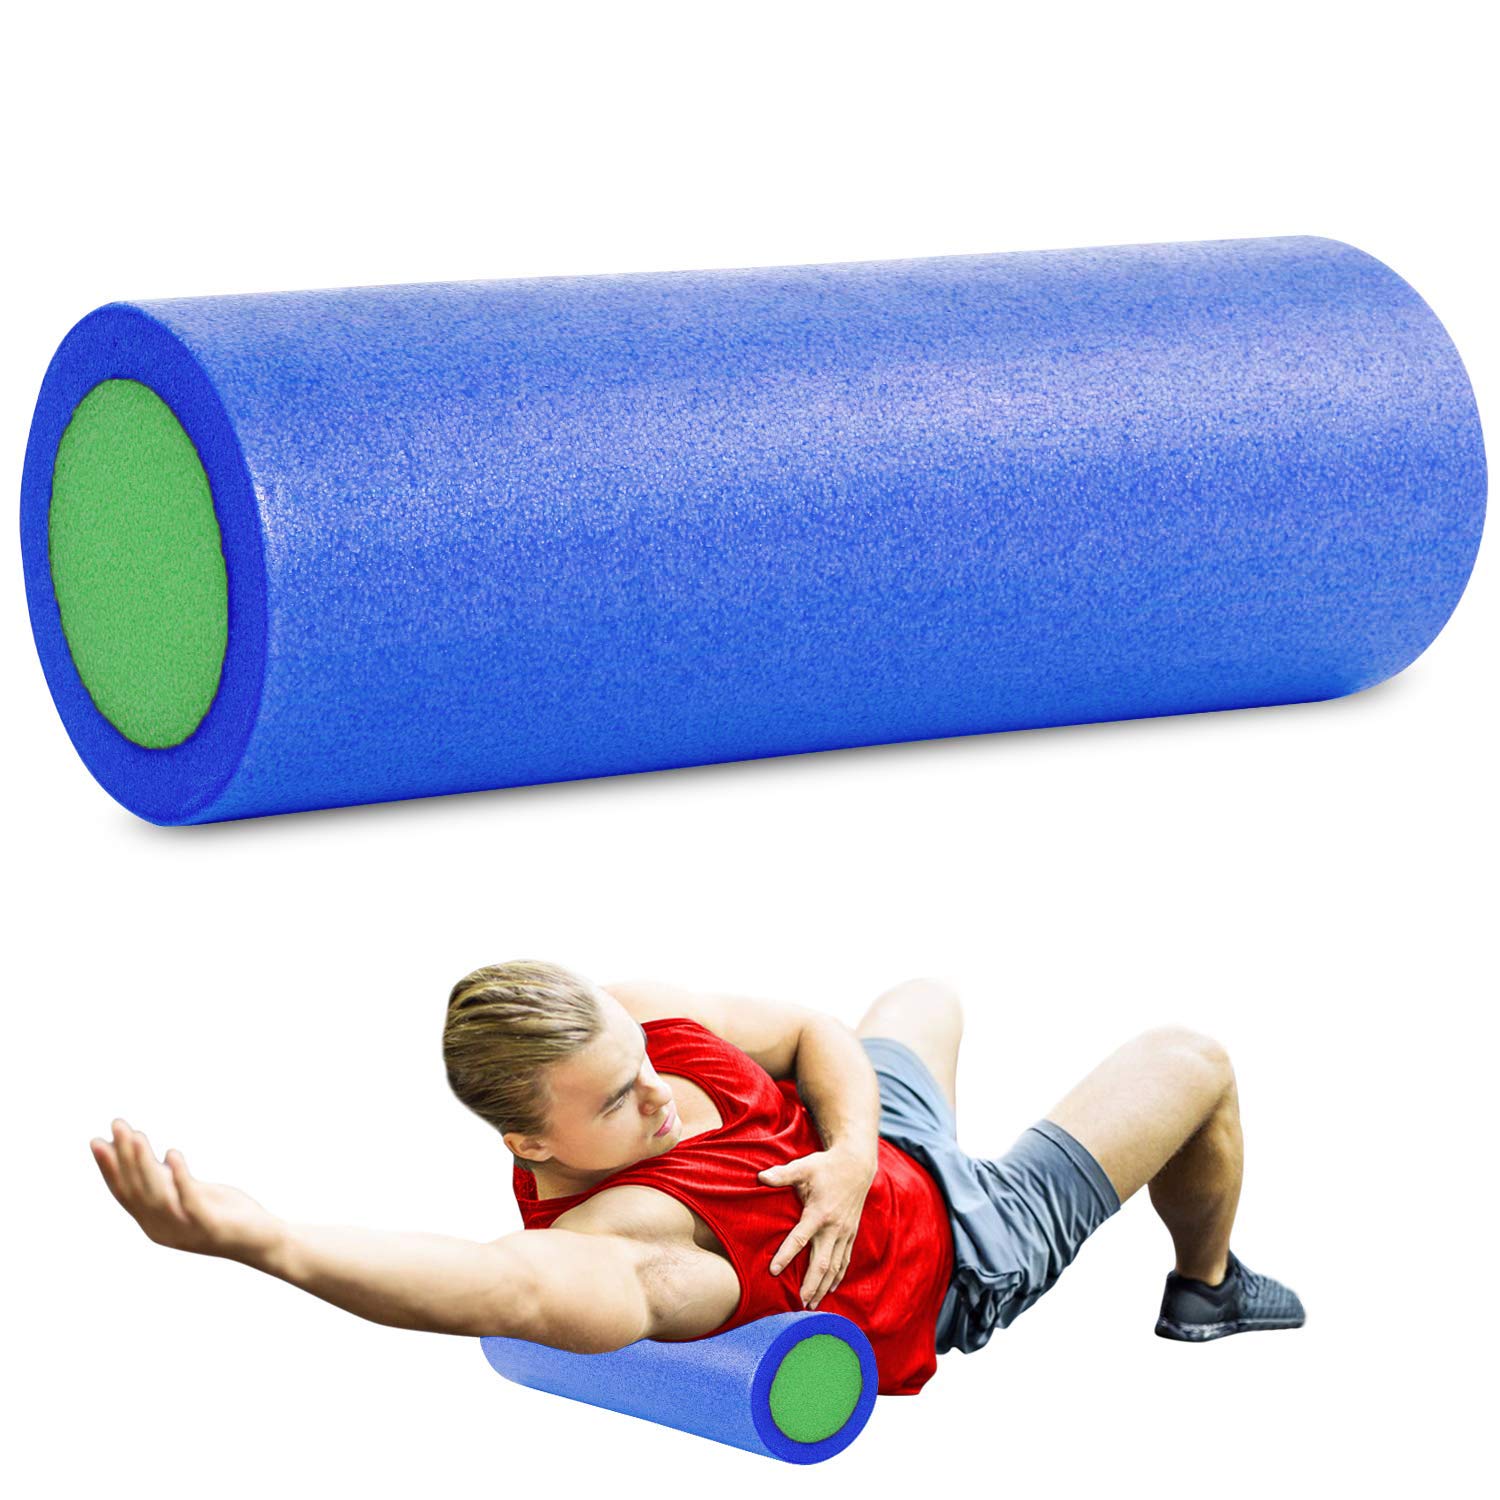 EPE Foam Roller for Physical Therapy and Exercise